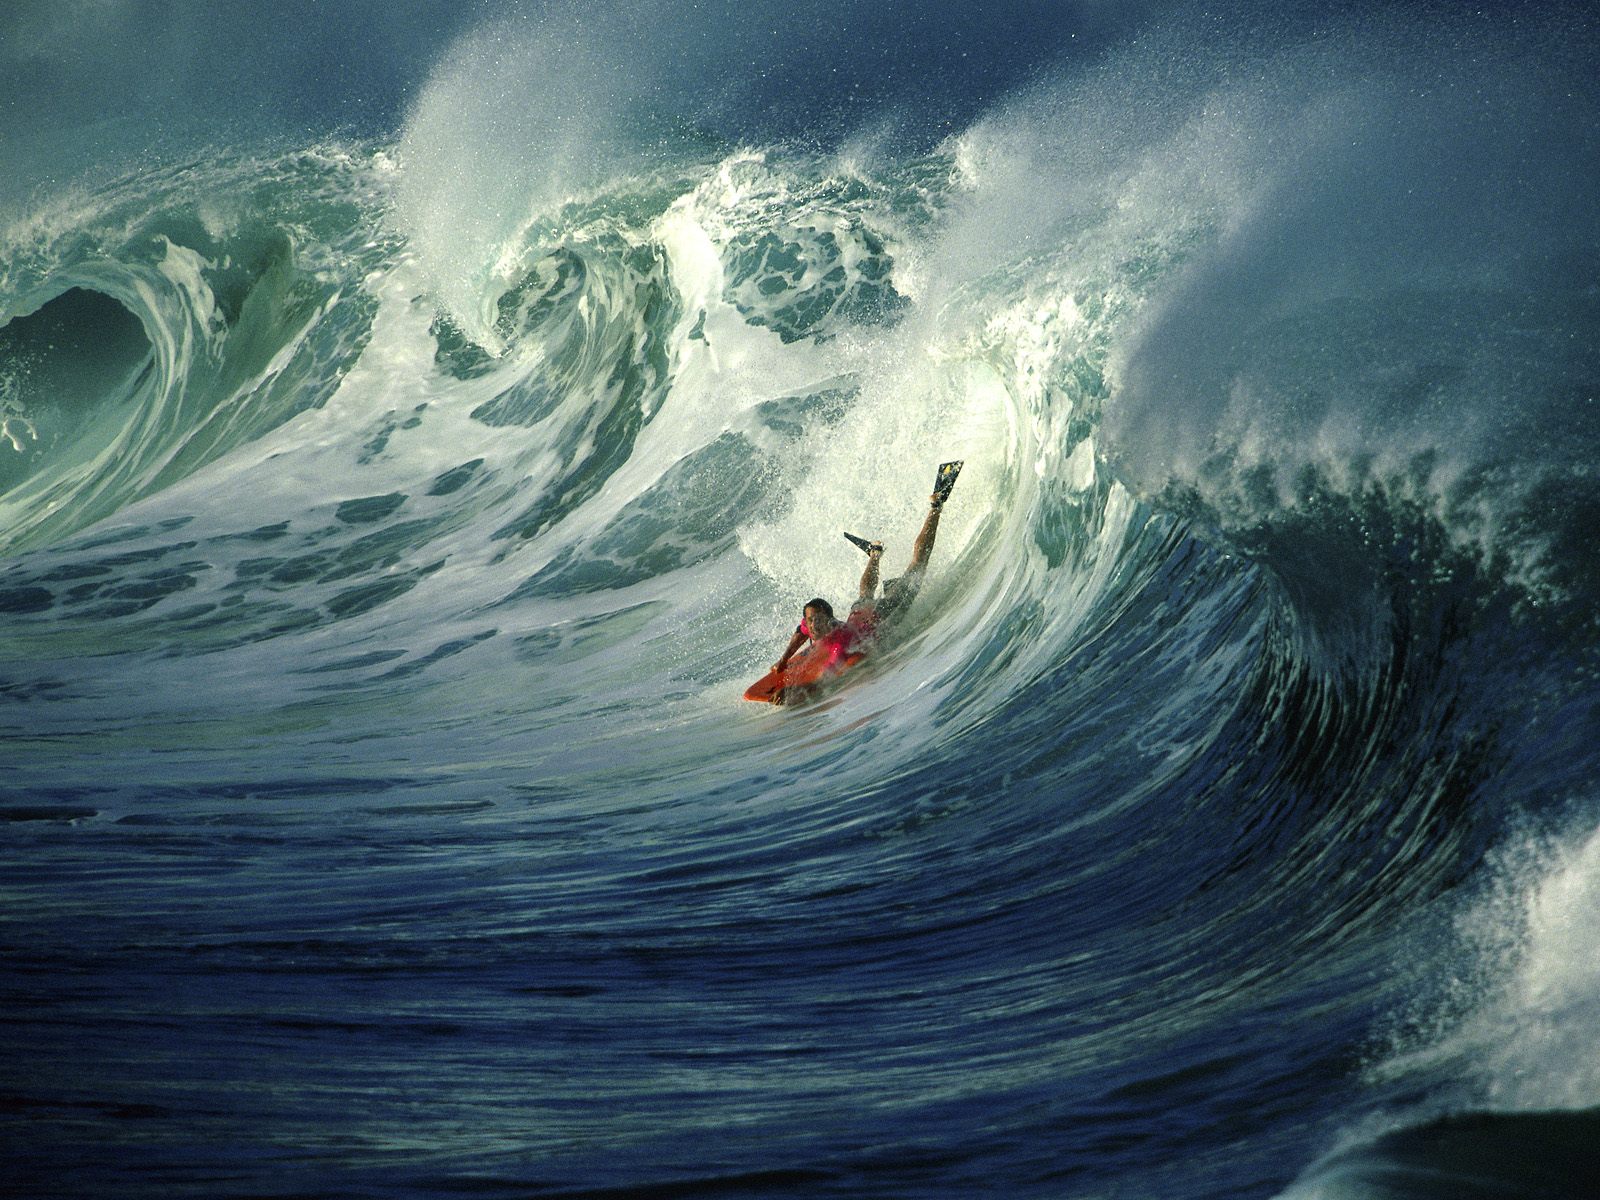 Download full size Extreme Surfing wallpaper / 1600x1200